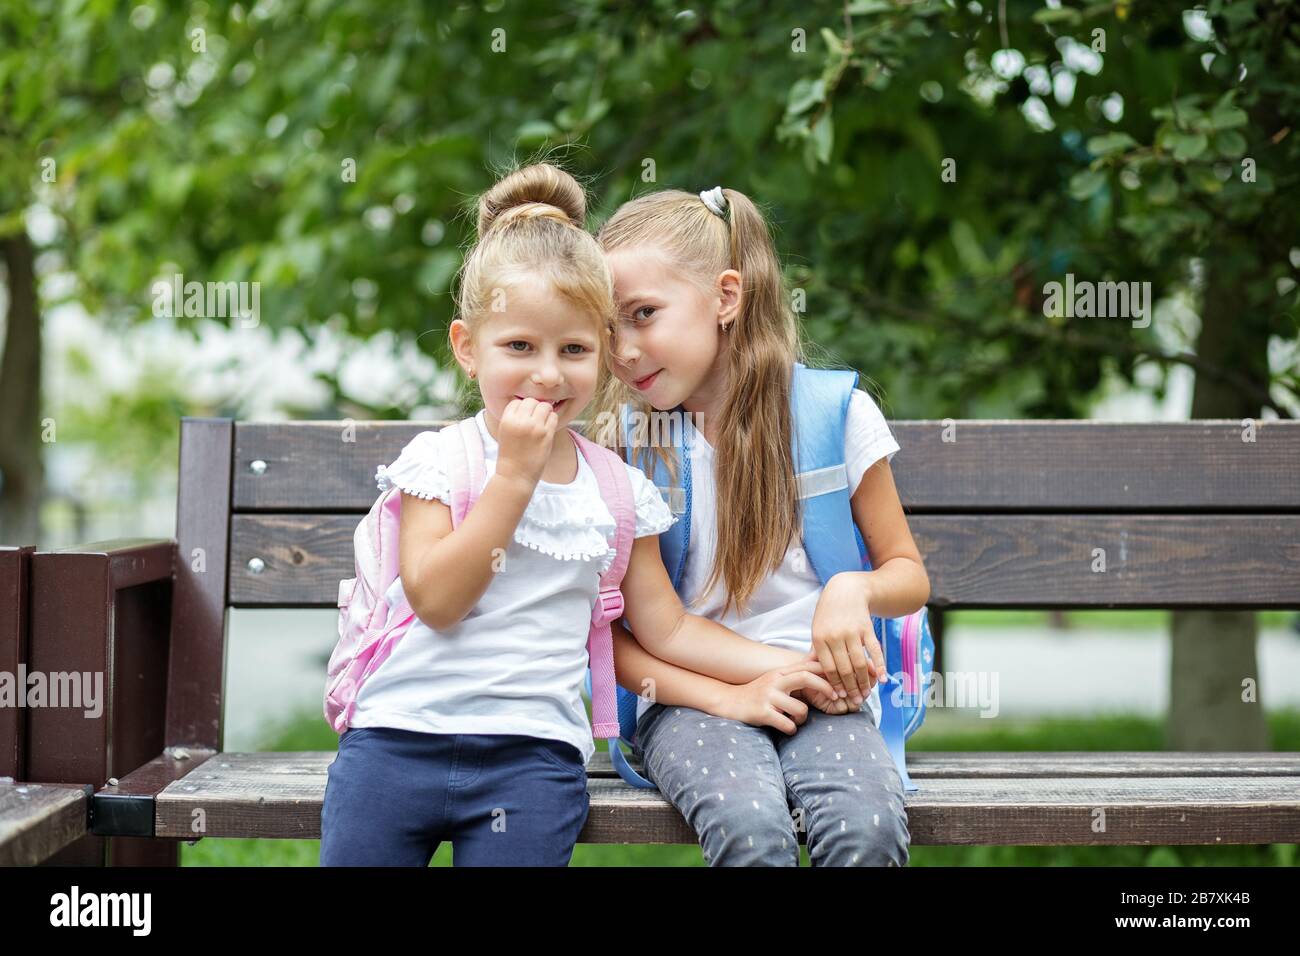 Two small children tell secrets on a bench. Girls with backpacks. The concept is back to school, family, friendship and childhood. Stock Photo